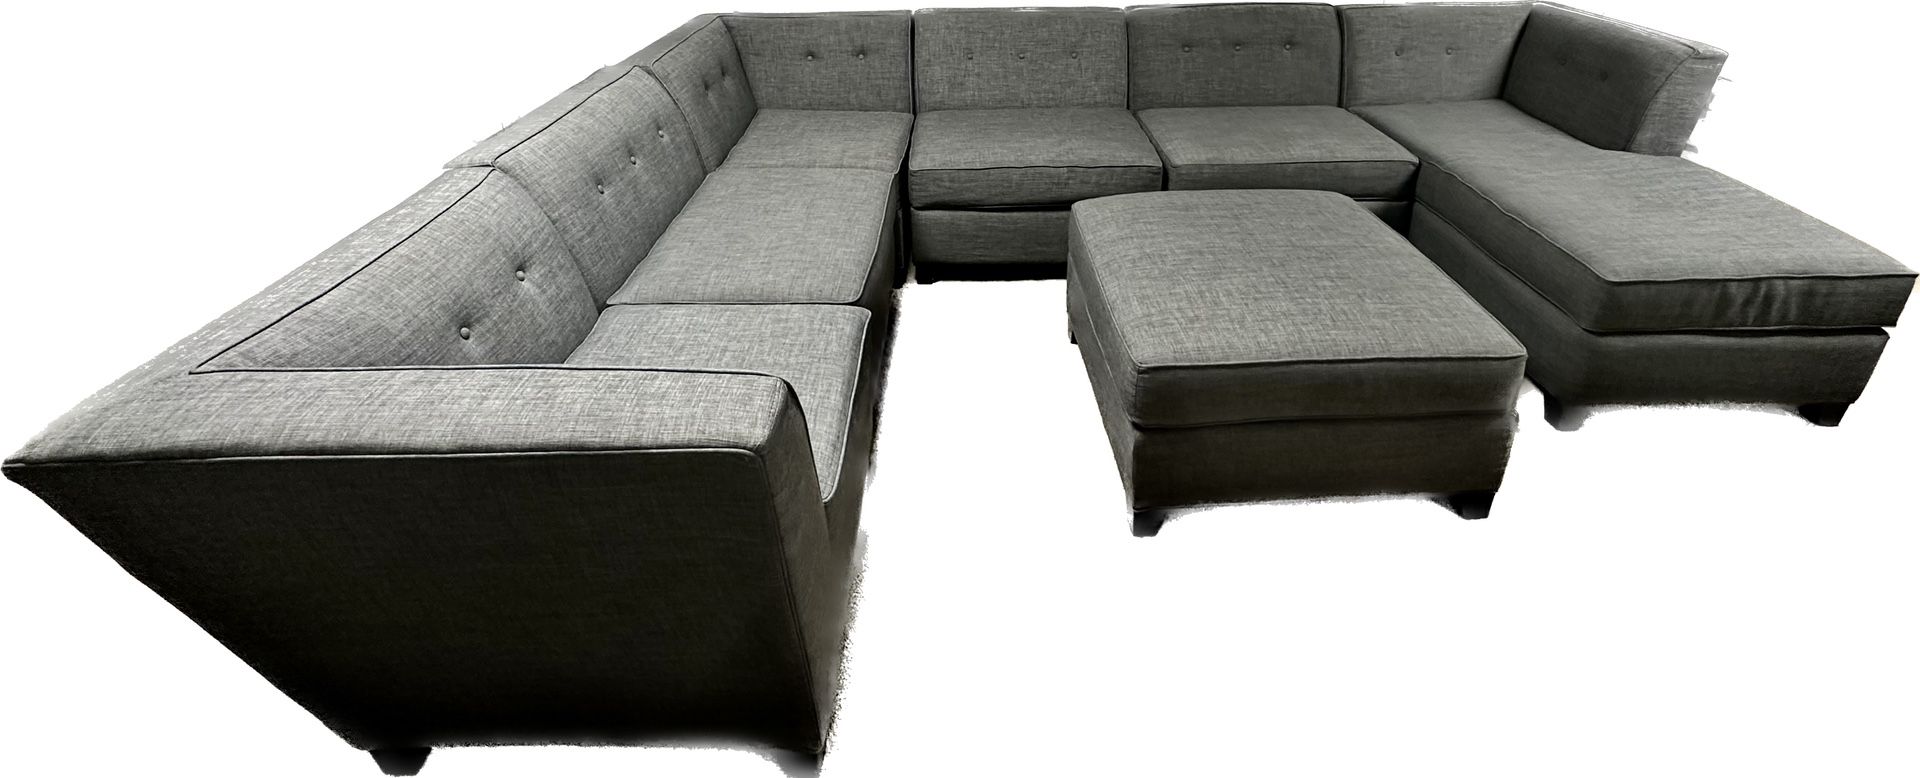 Sectional Sofa with Ottoman - Seven Pieces 